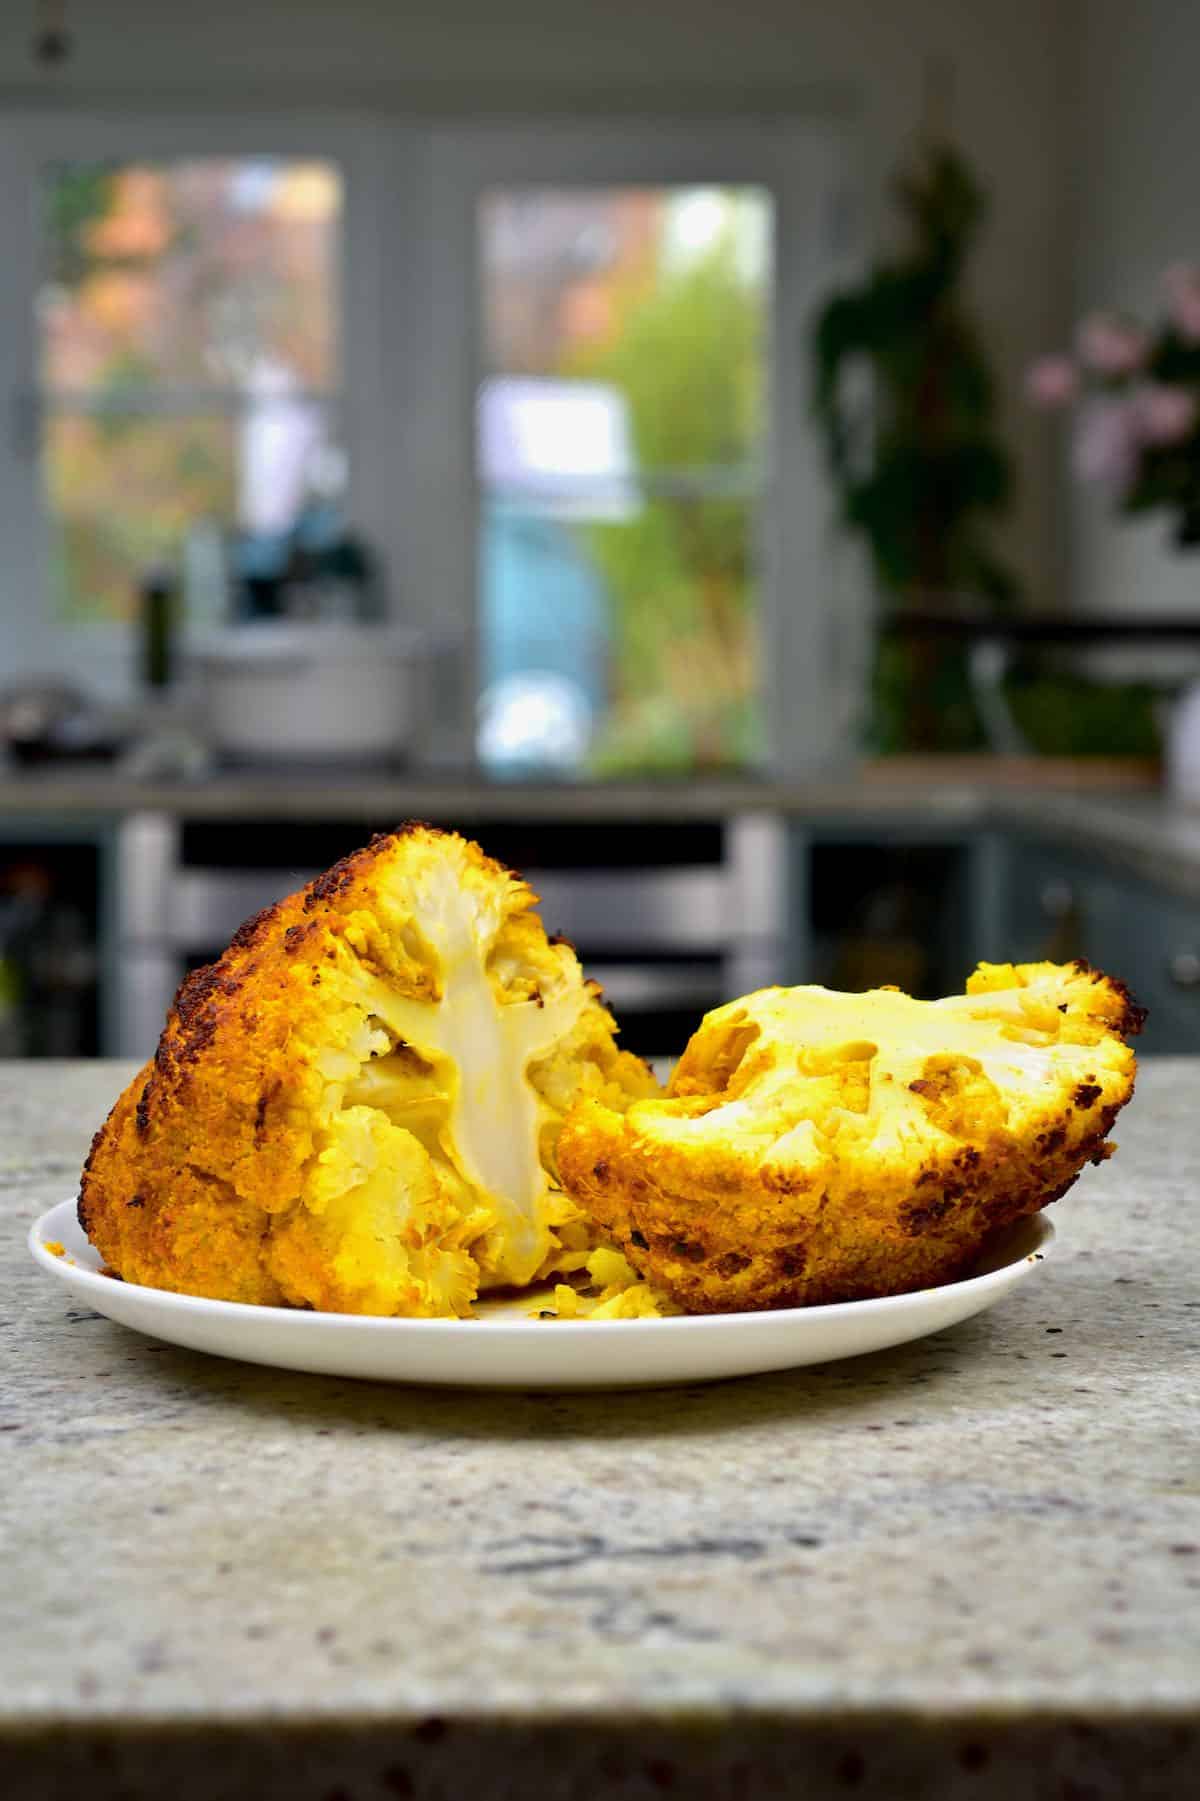 A baked turmeric covered cauliflower head cut in two